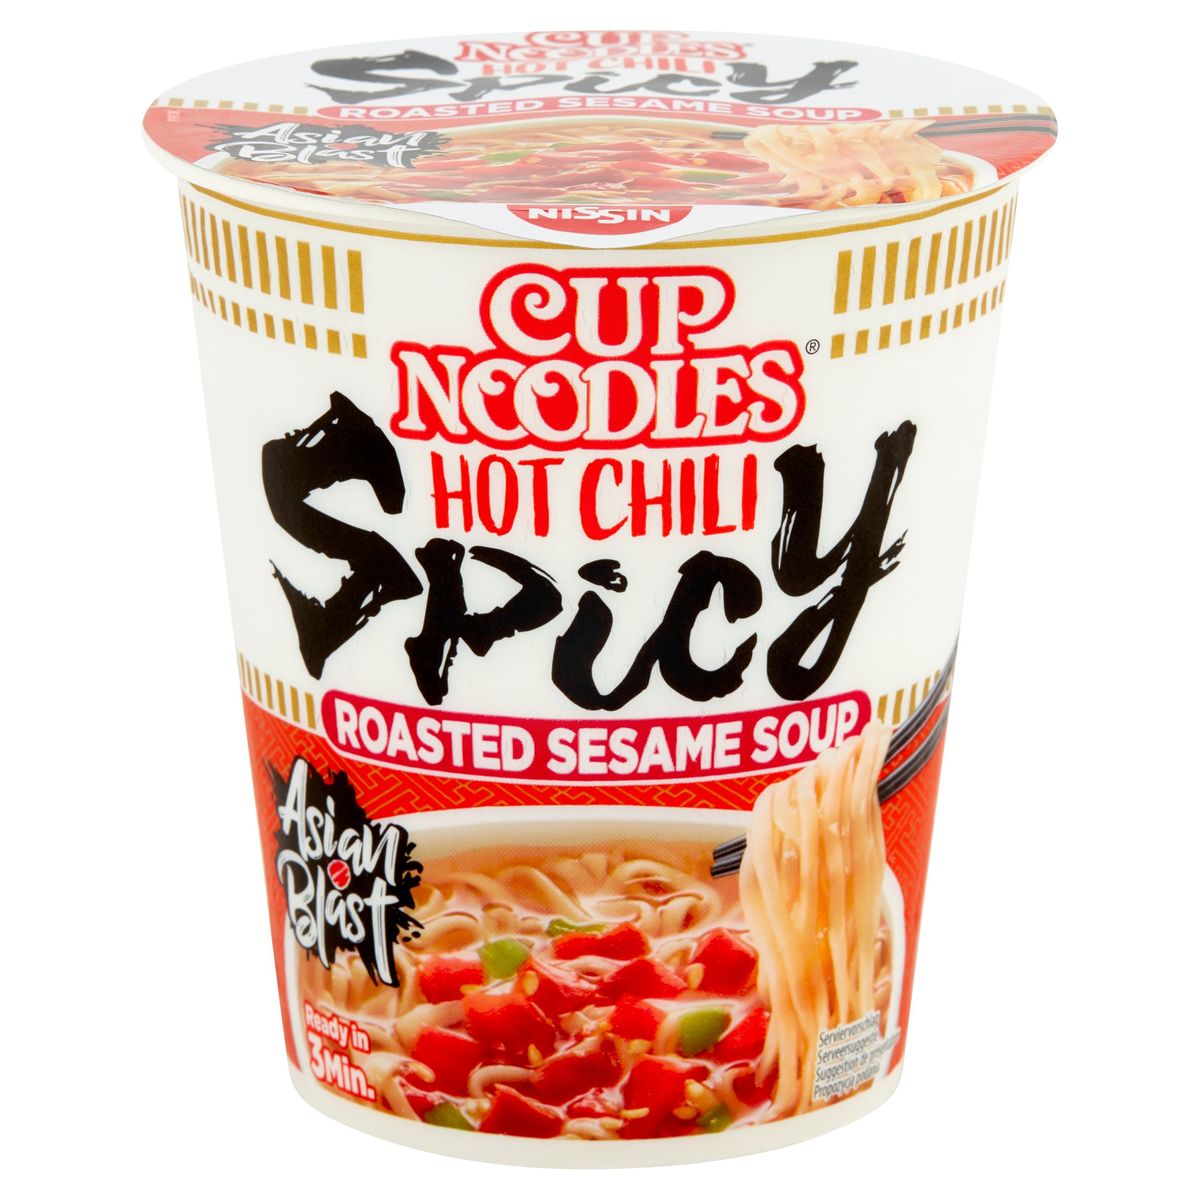 Nissin Cup Noodles Hot Chili Spicy Roasted Sesame Soup 66 g